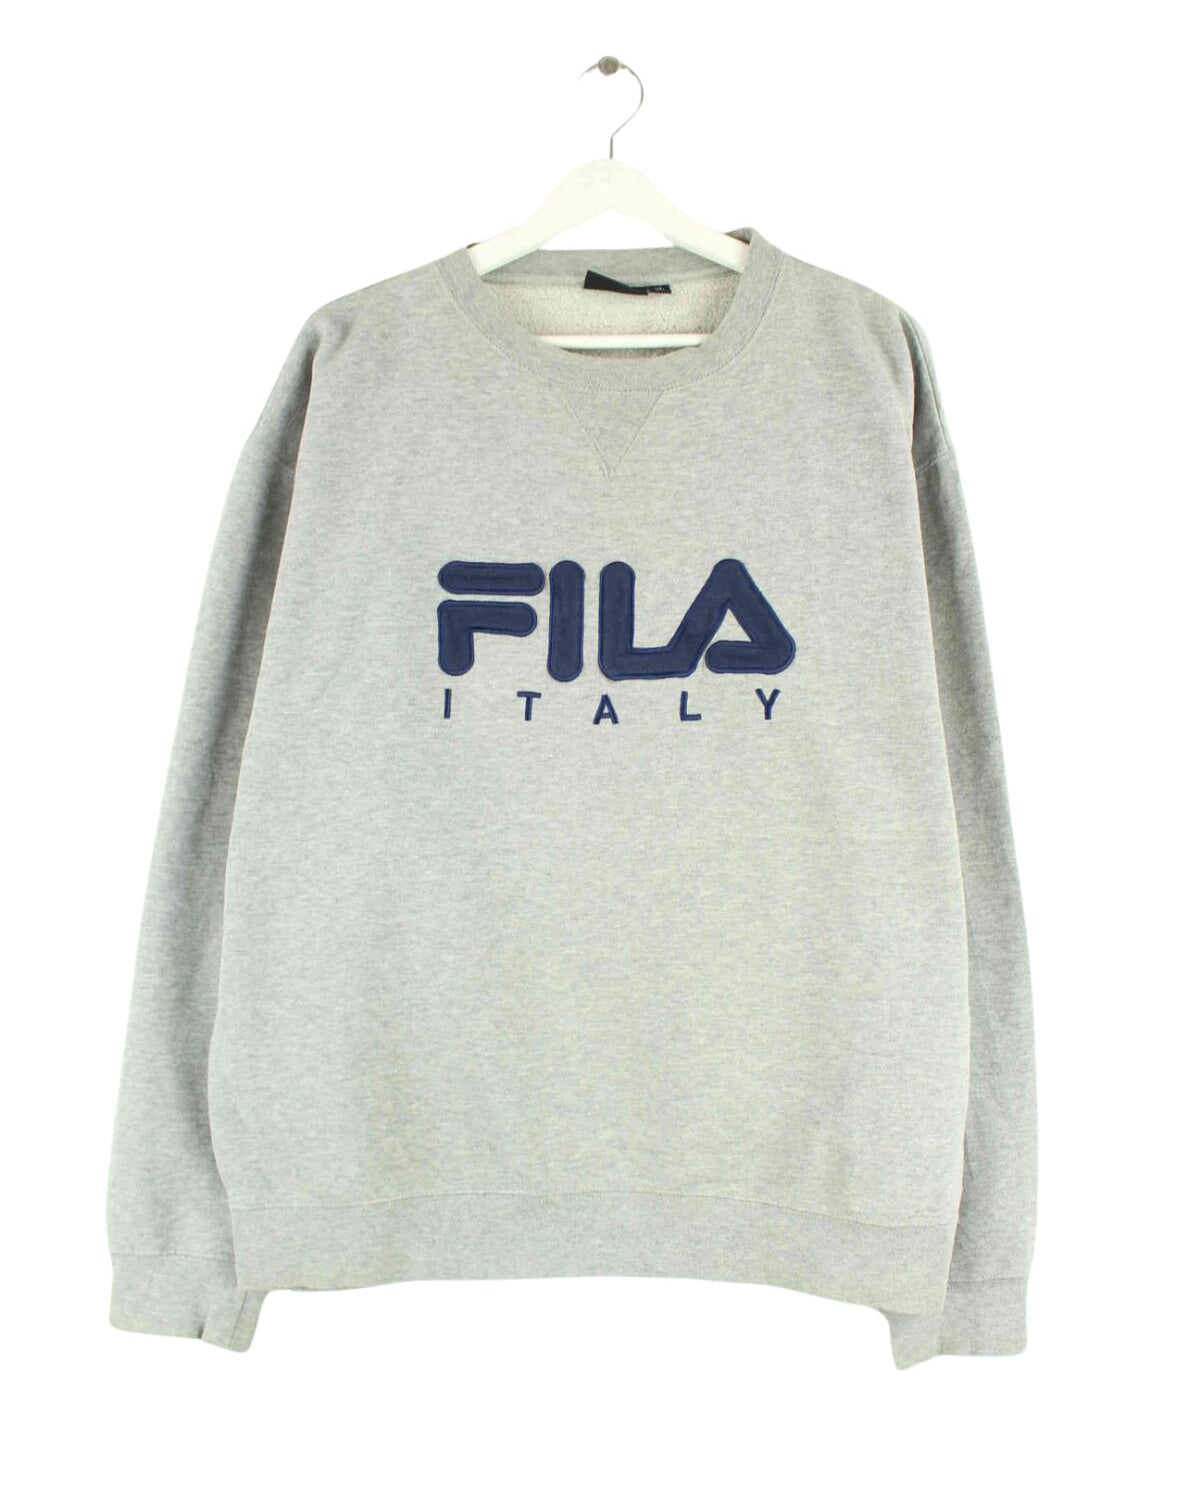 Fila Embroidered Sweater Grau XL (front image)